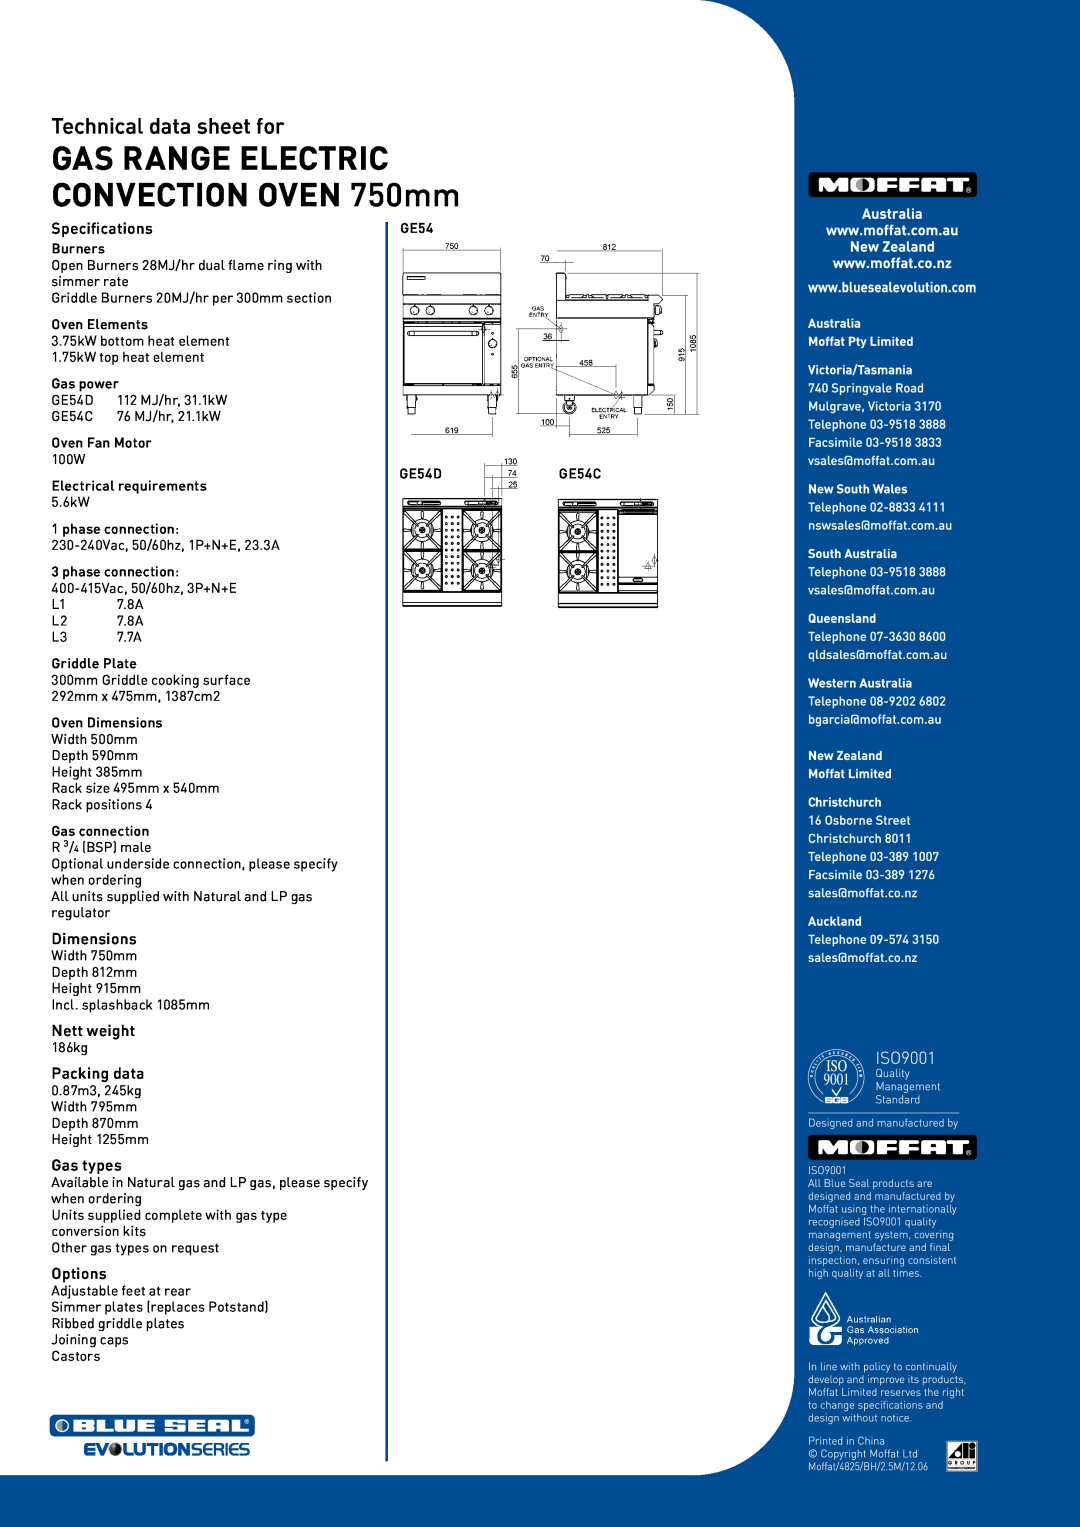 Moffat GE54D, GE54C Specifications, Dimensions, Nett weight, Packing data, Gas types, Options, Technical data sheet for 